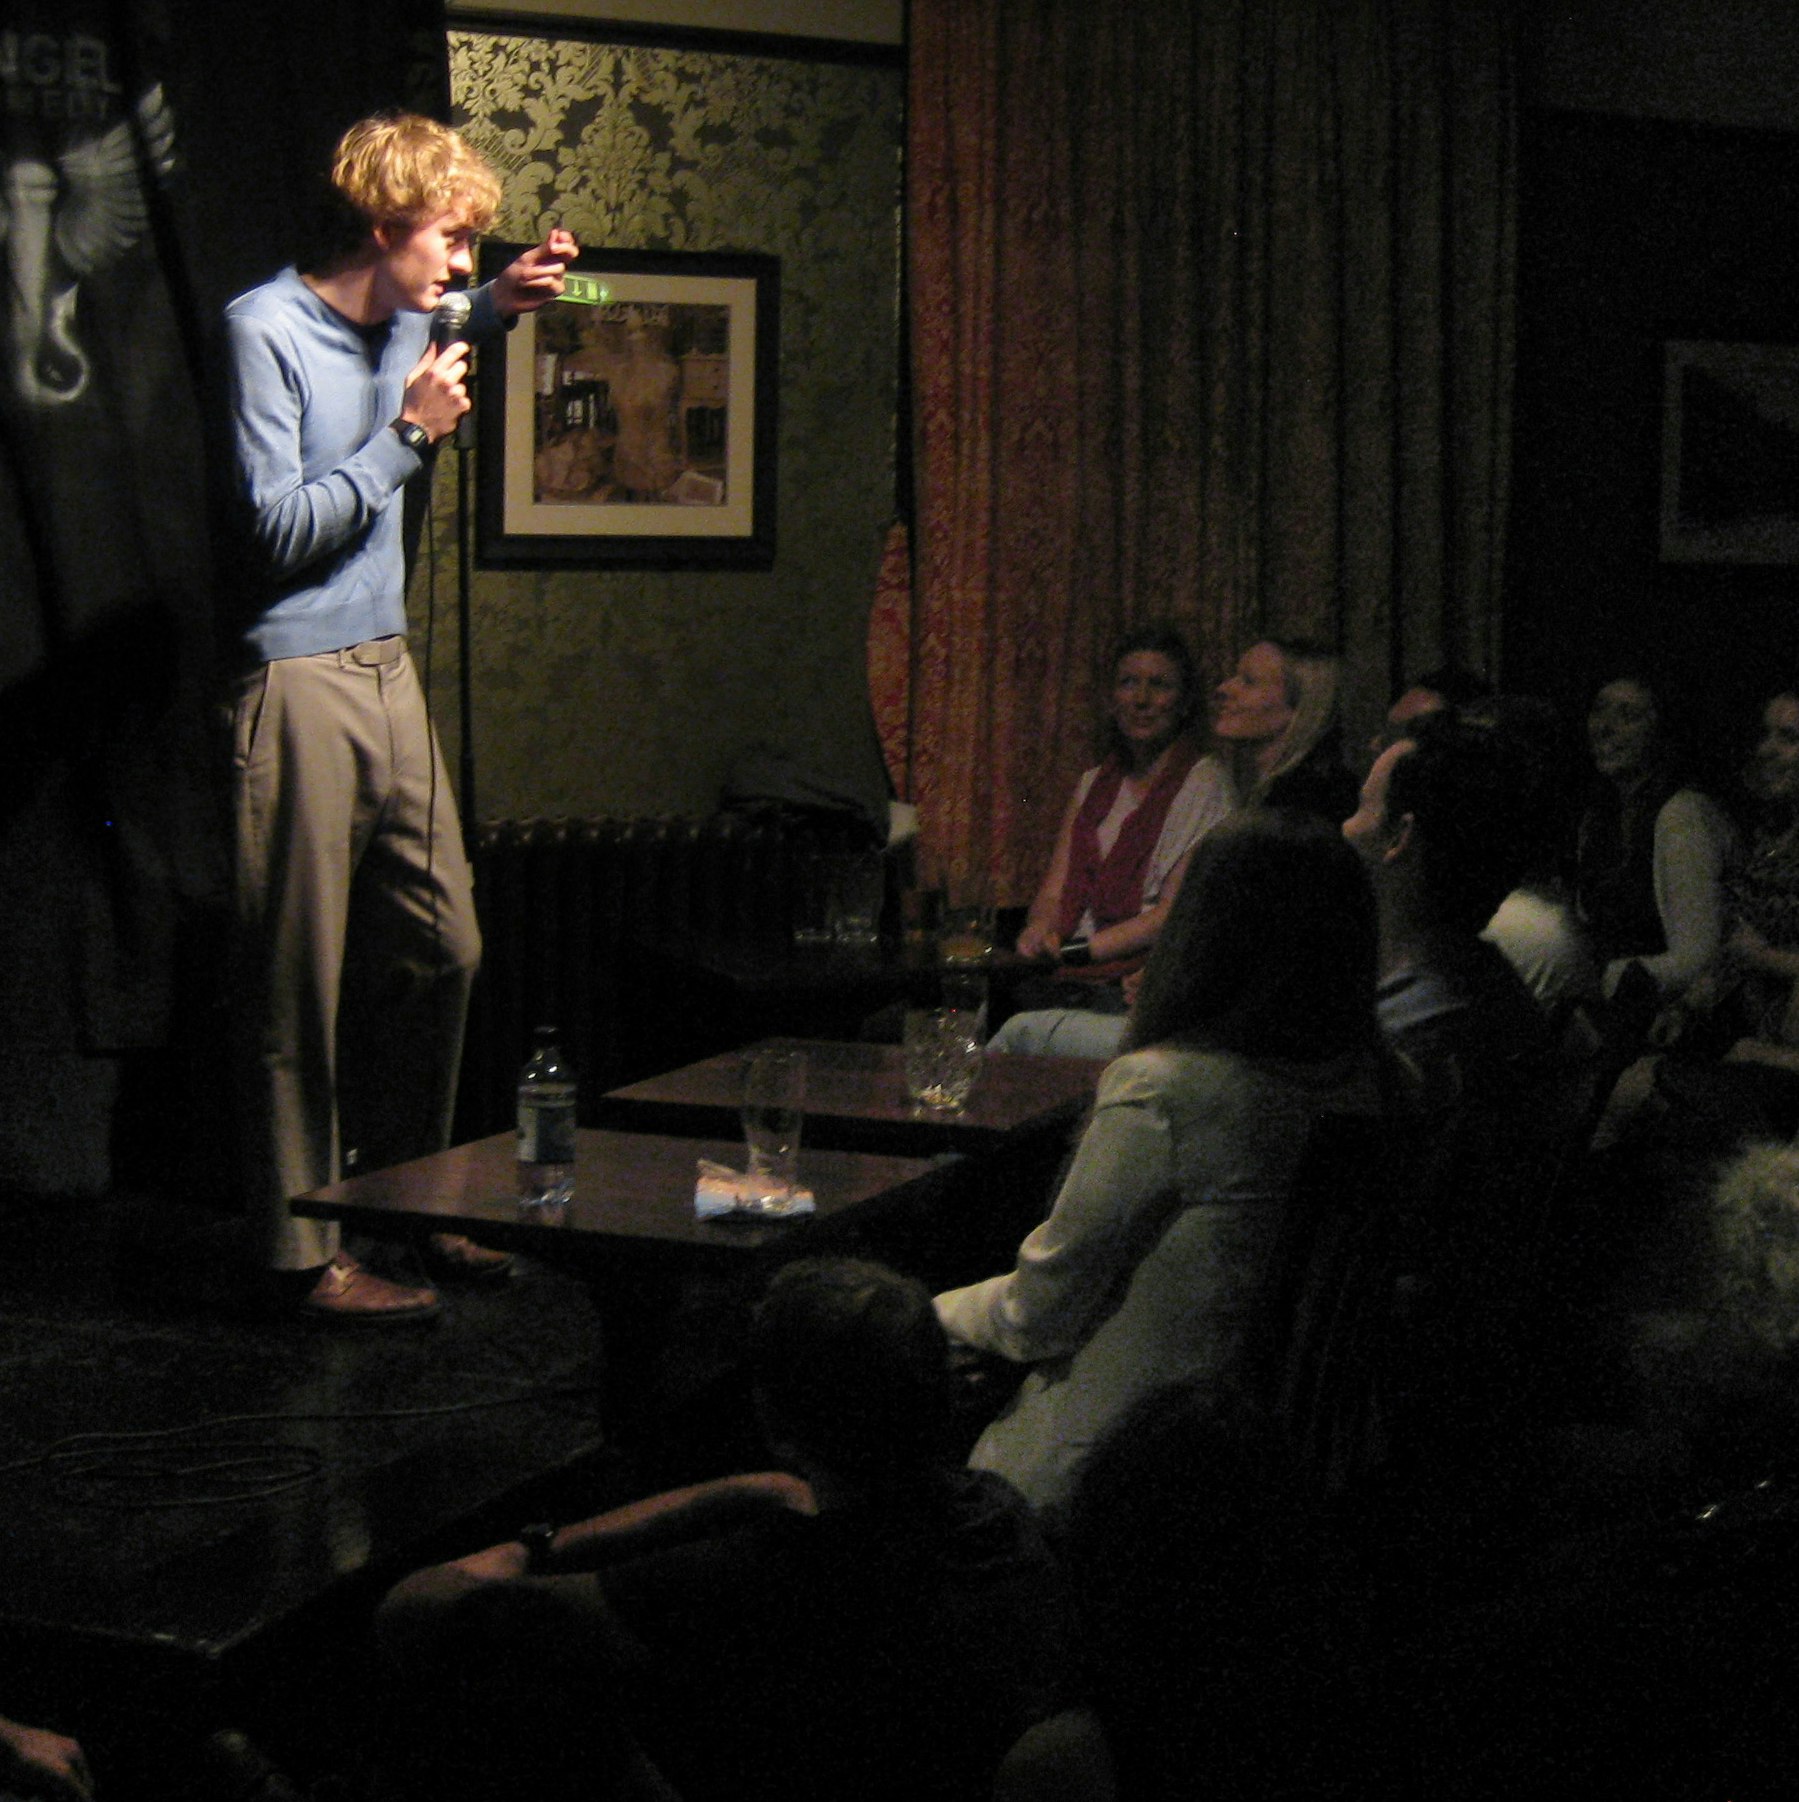 Angel Comedy RAW (Free) at The Camden Head - Angel Comedy